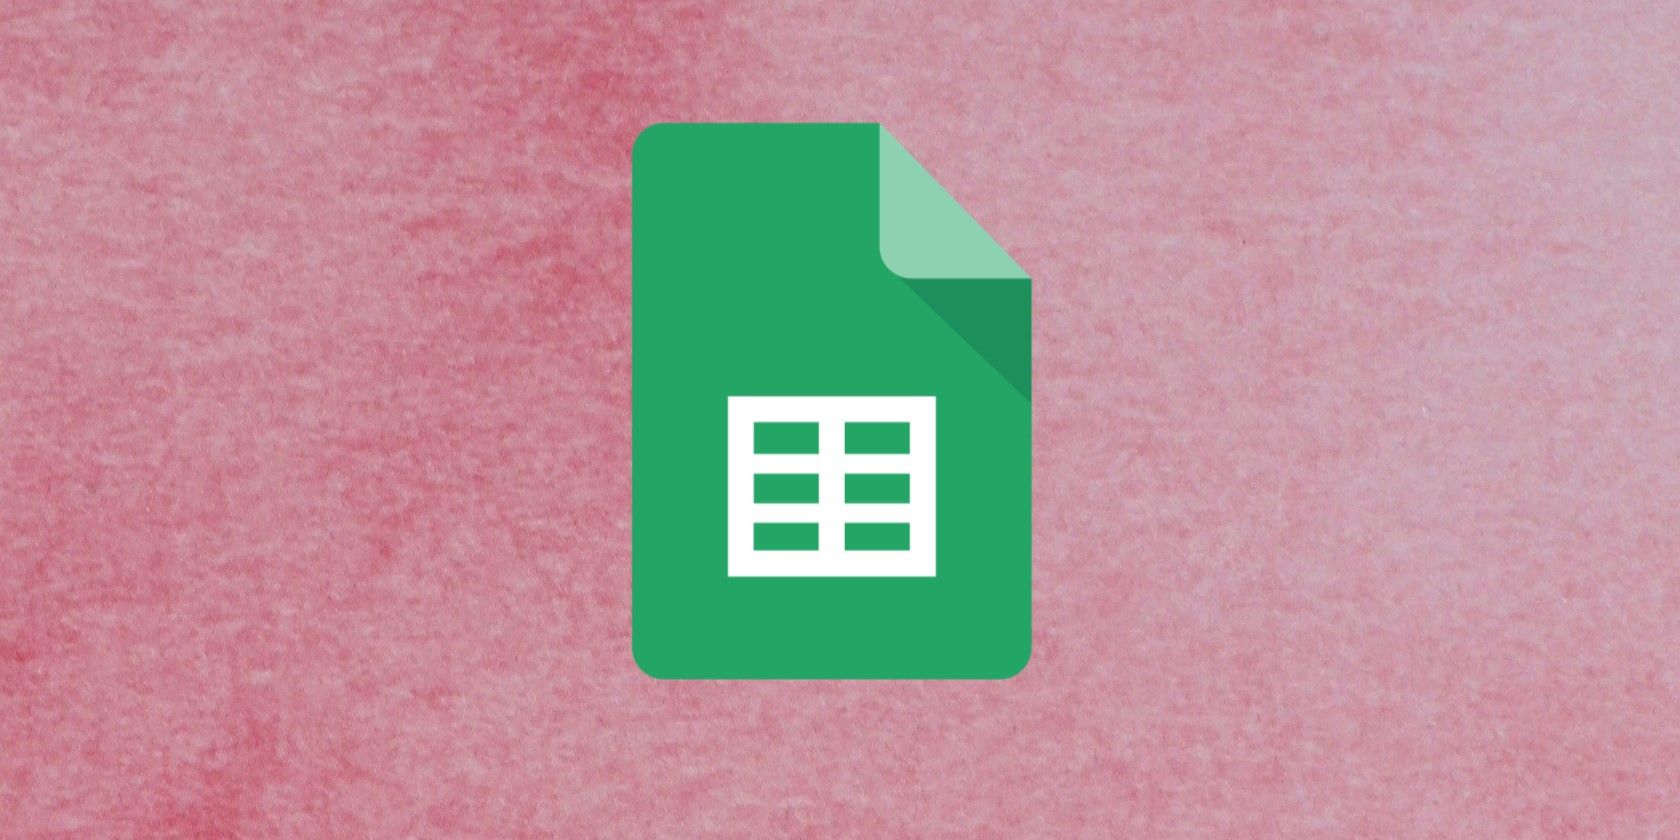 The Google Sheets logo floating on a pink background